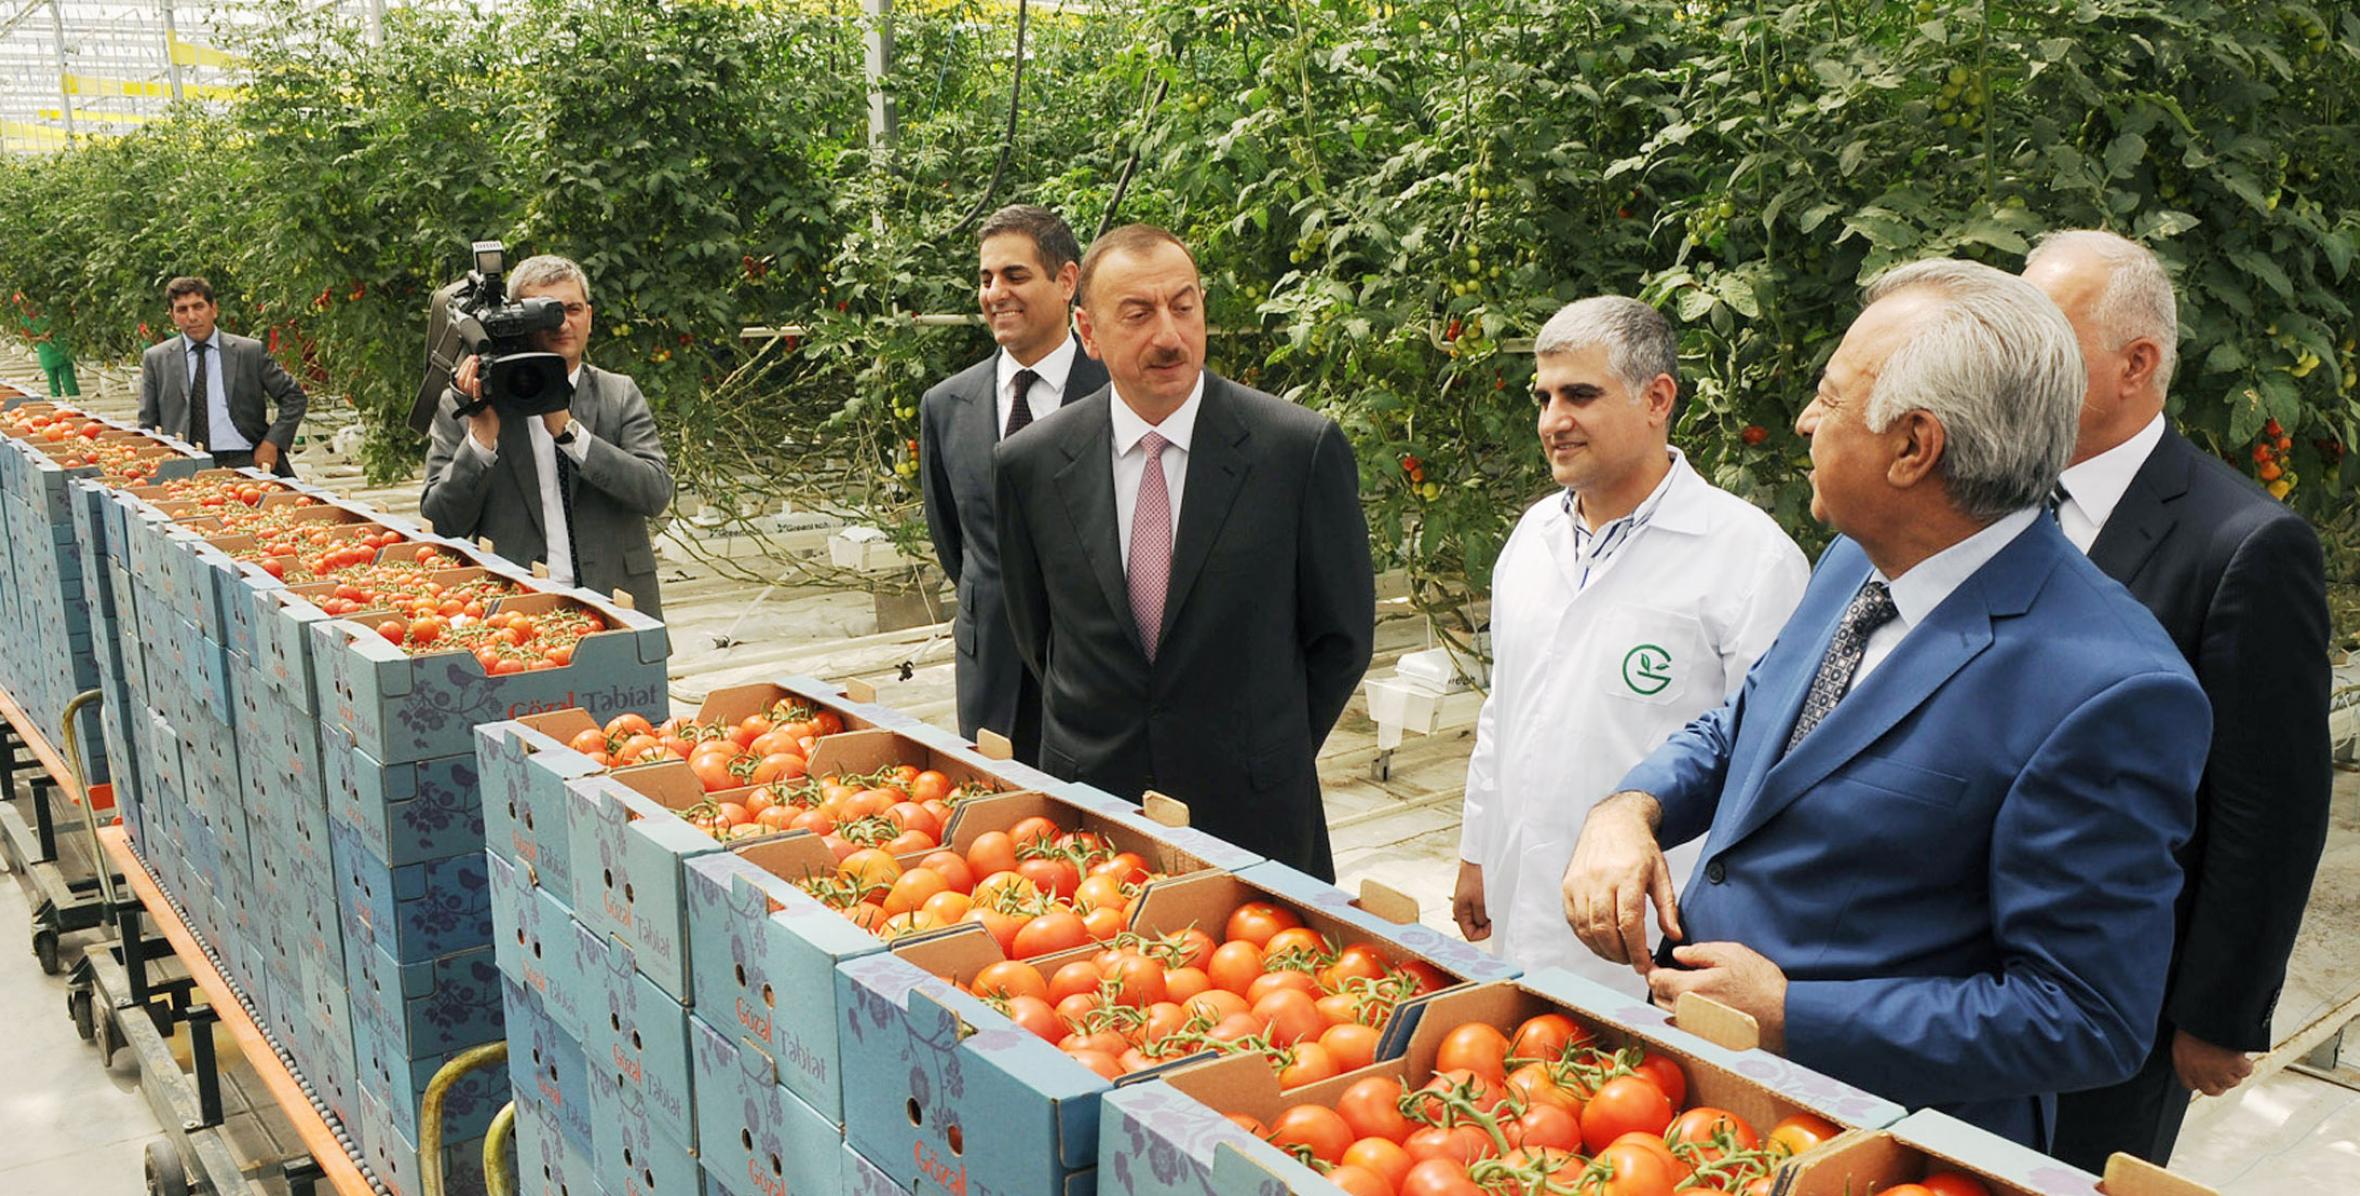 Ilham Aliyev reviewed a modern greenhouse complex of Green Tech LLC owned by Azersun Holding Group